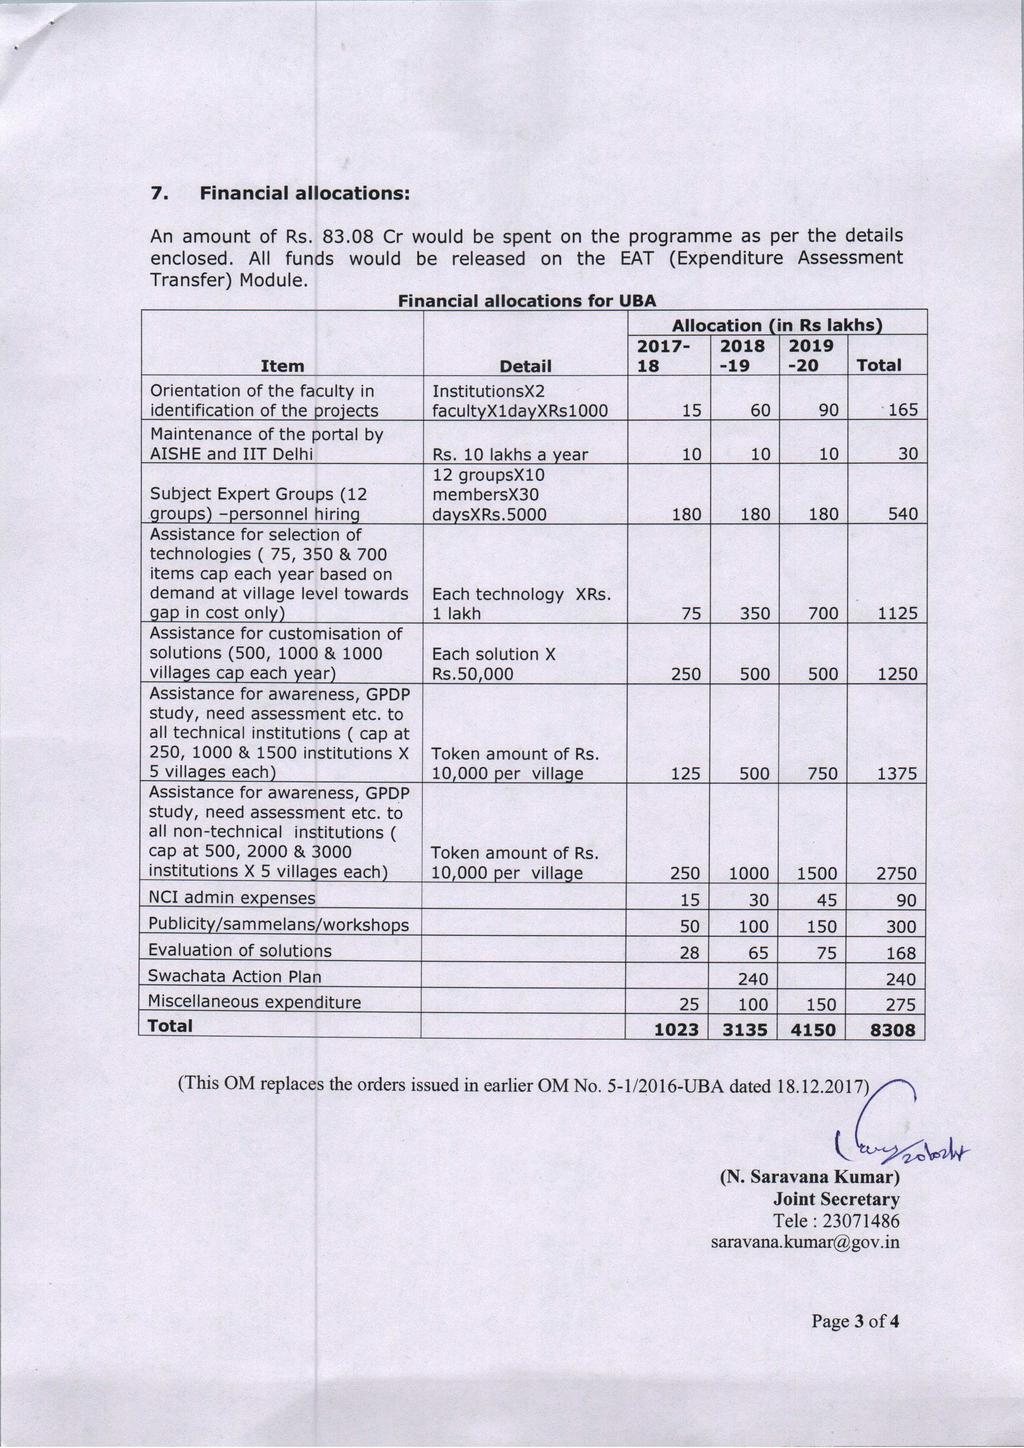 7. Financial allocations: An amount of Rs. 83.08 Cr would be spent on the programme as per the details enclosed. All funds would be released on the EAT (Expenditure Assessment Transfer) Module.